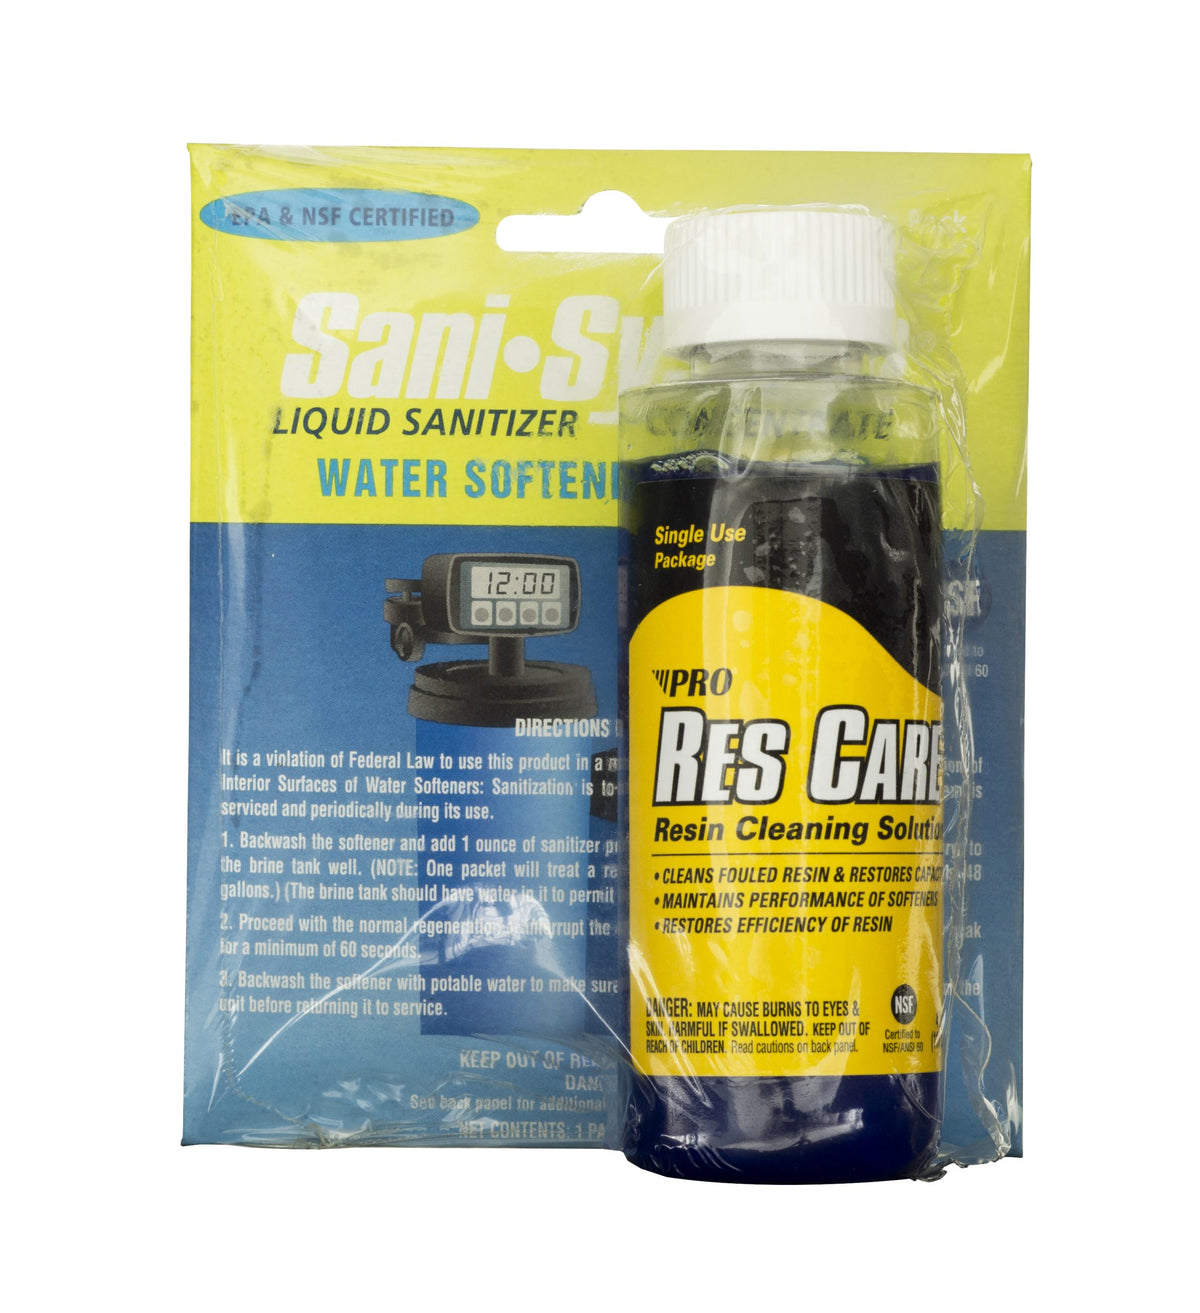 Res Care Water Softener Cleaner